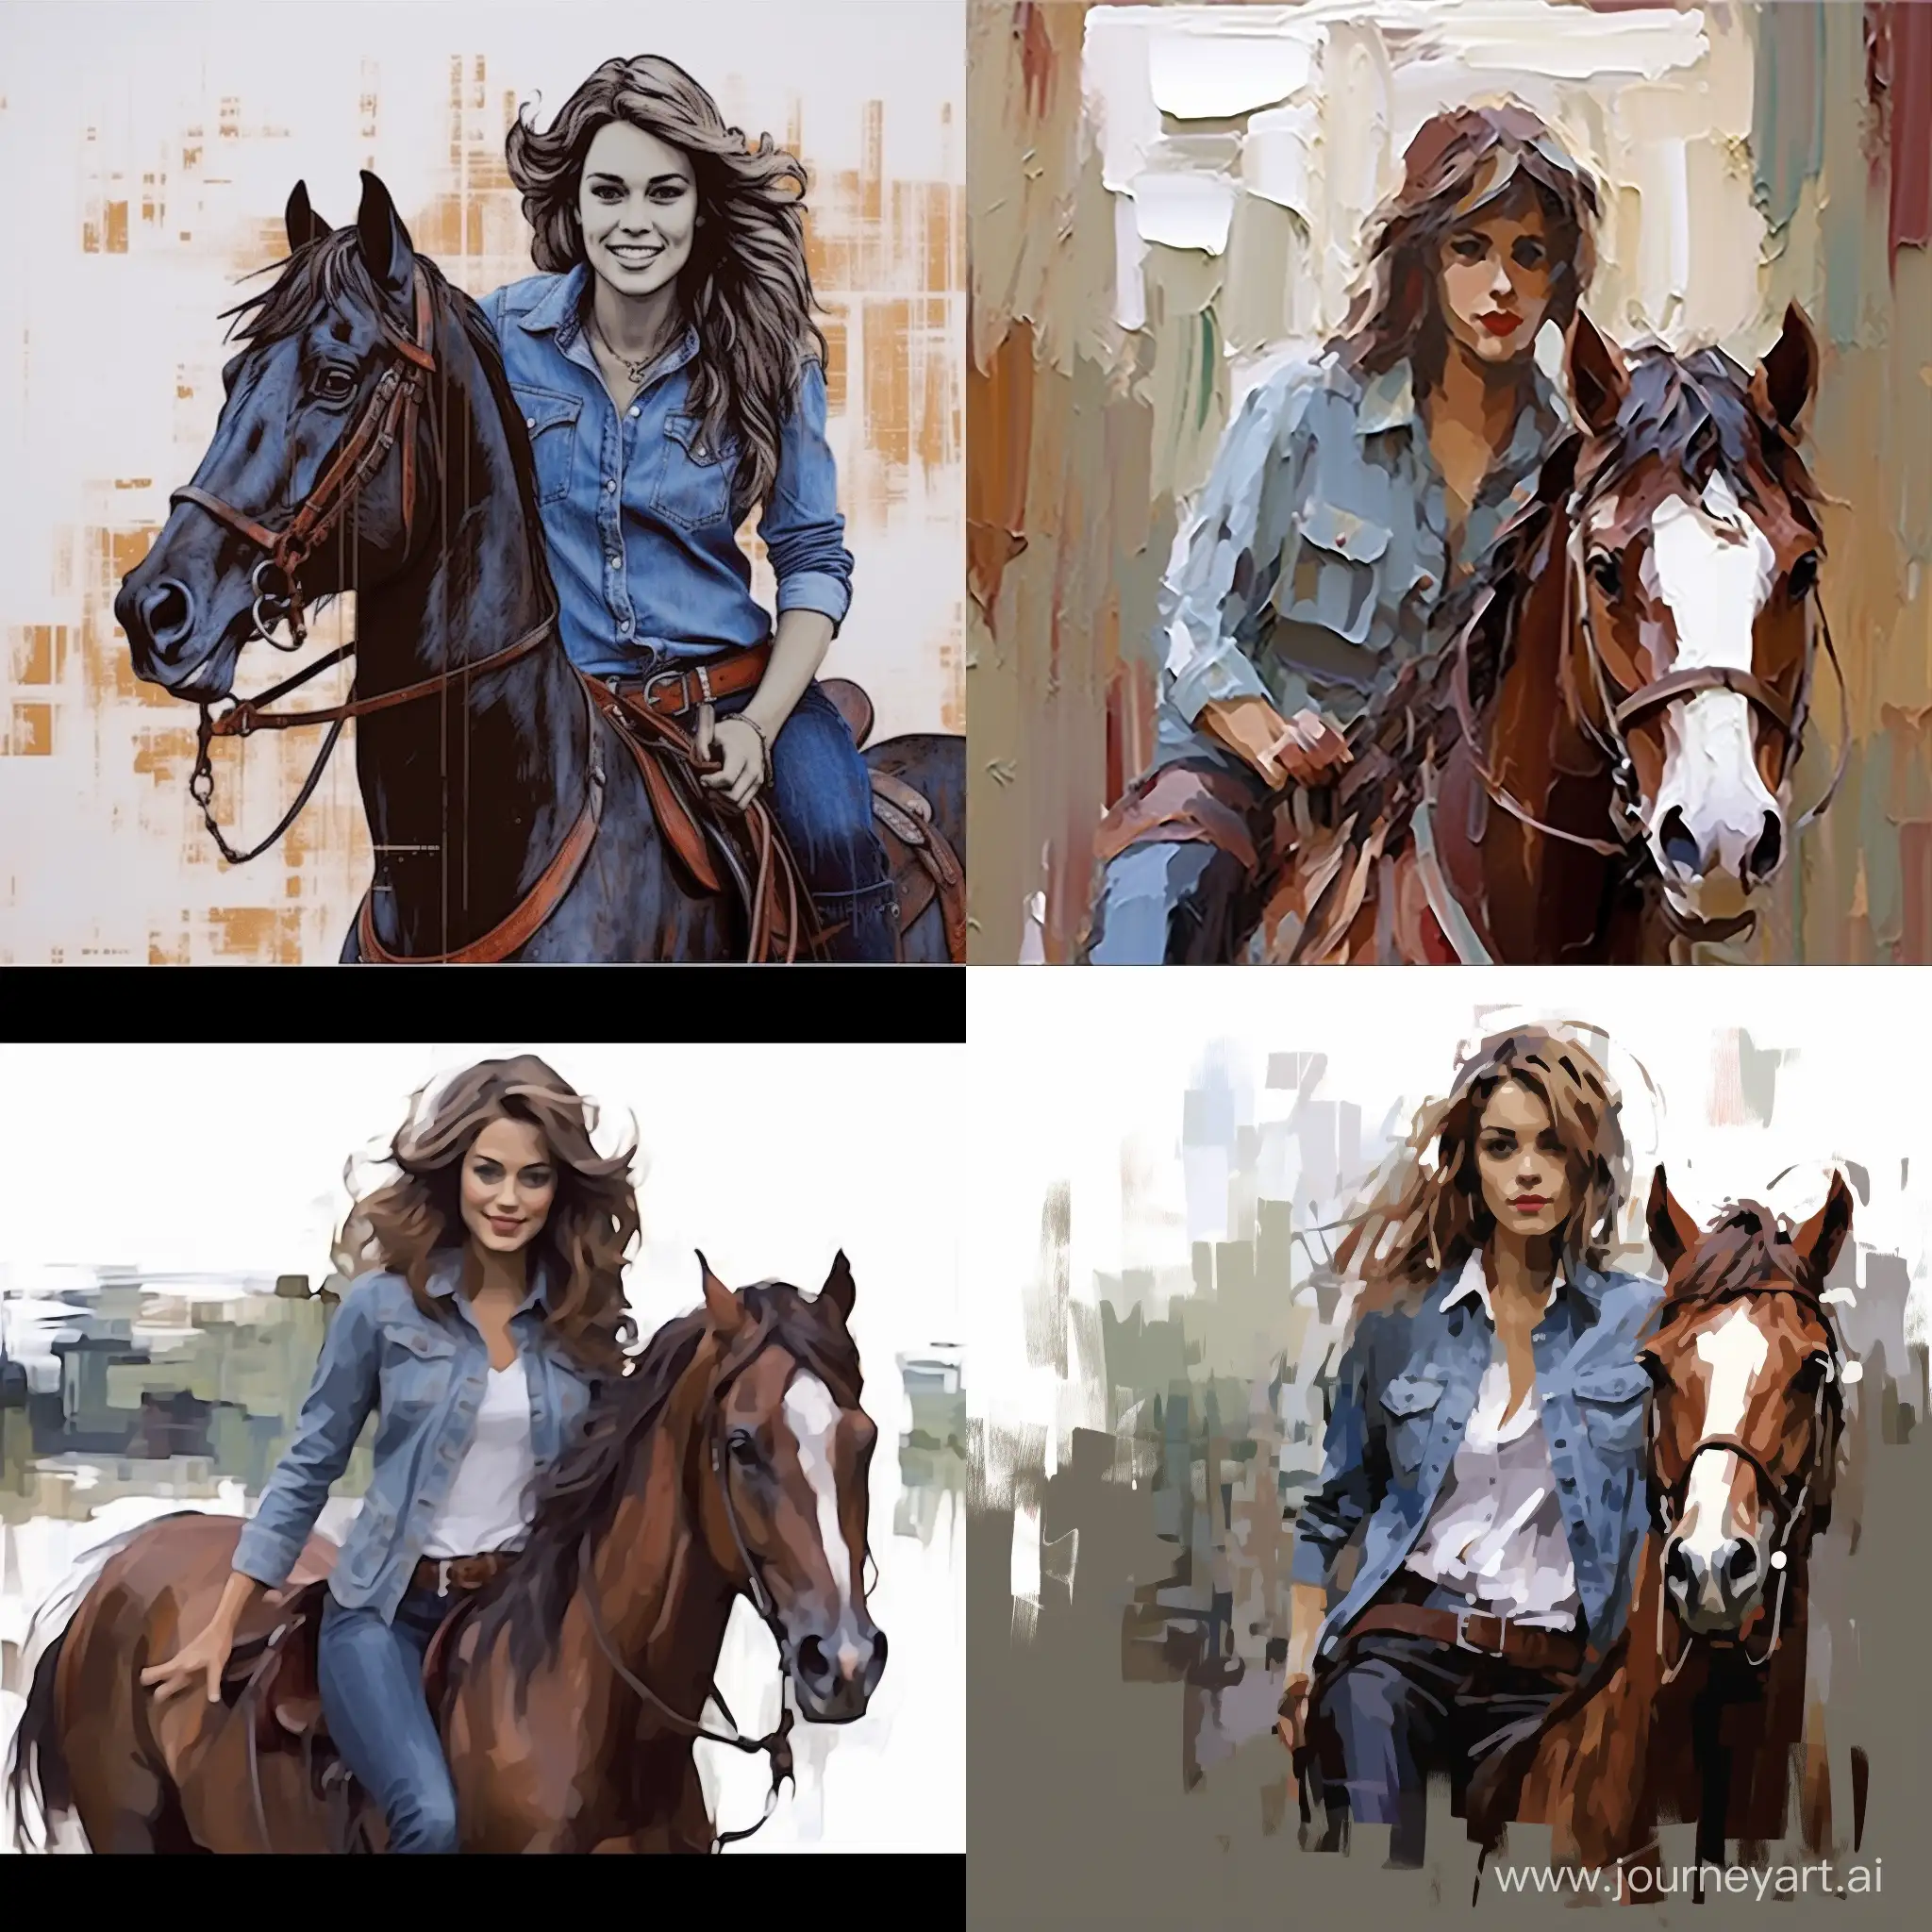 Joyful-Cowgirl-in-Designer-Western-Outfit-Stunning-Oil-Painting-Illustration